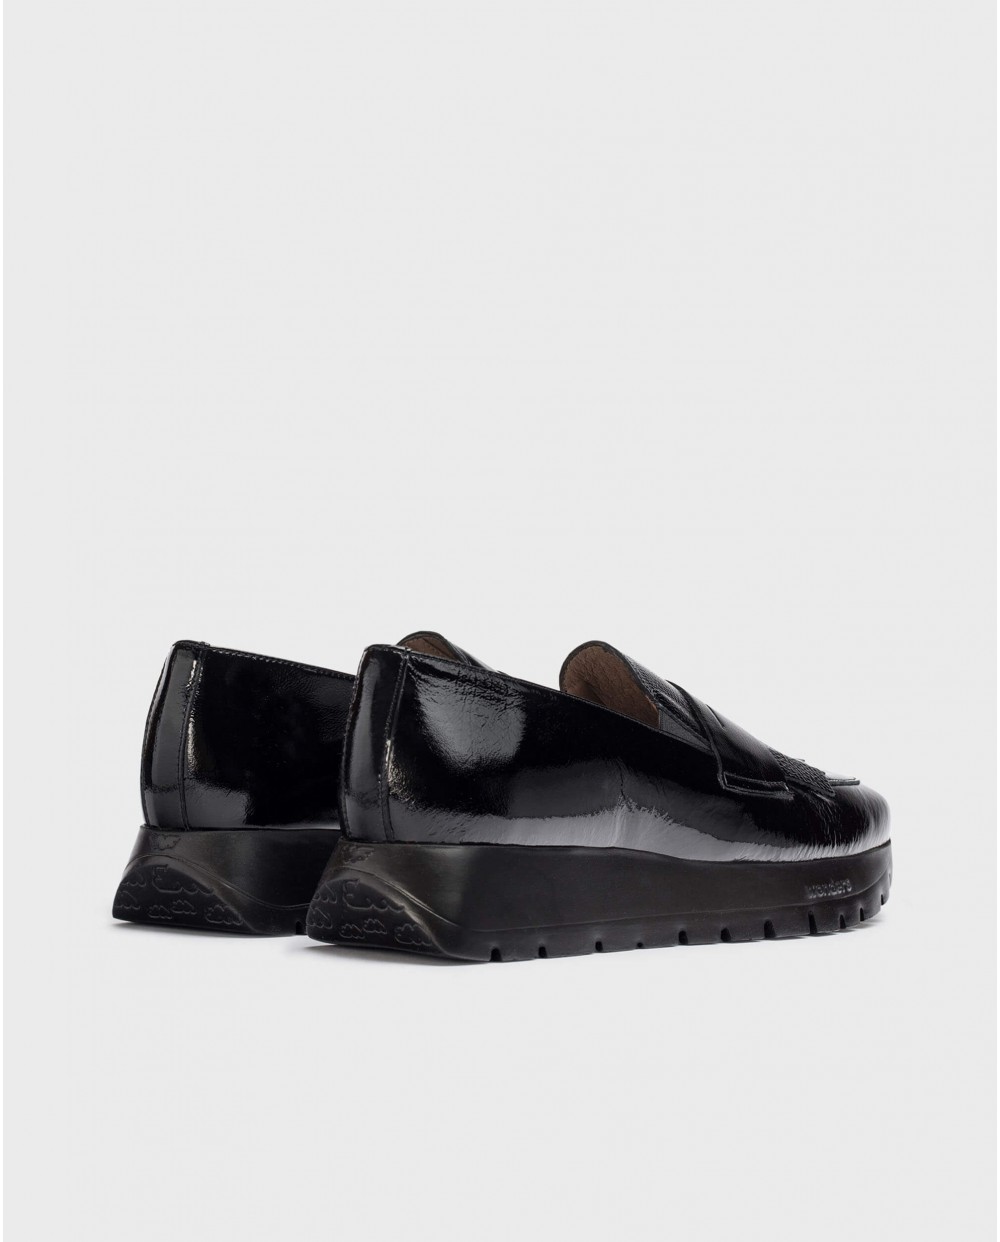 Wonders-Loafers-Black MATERIA moccasin